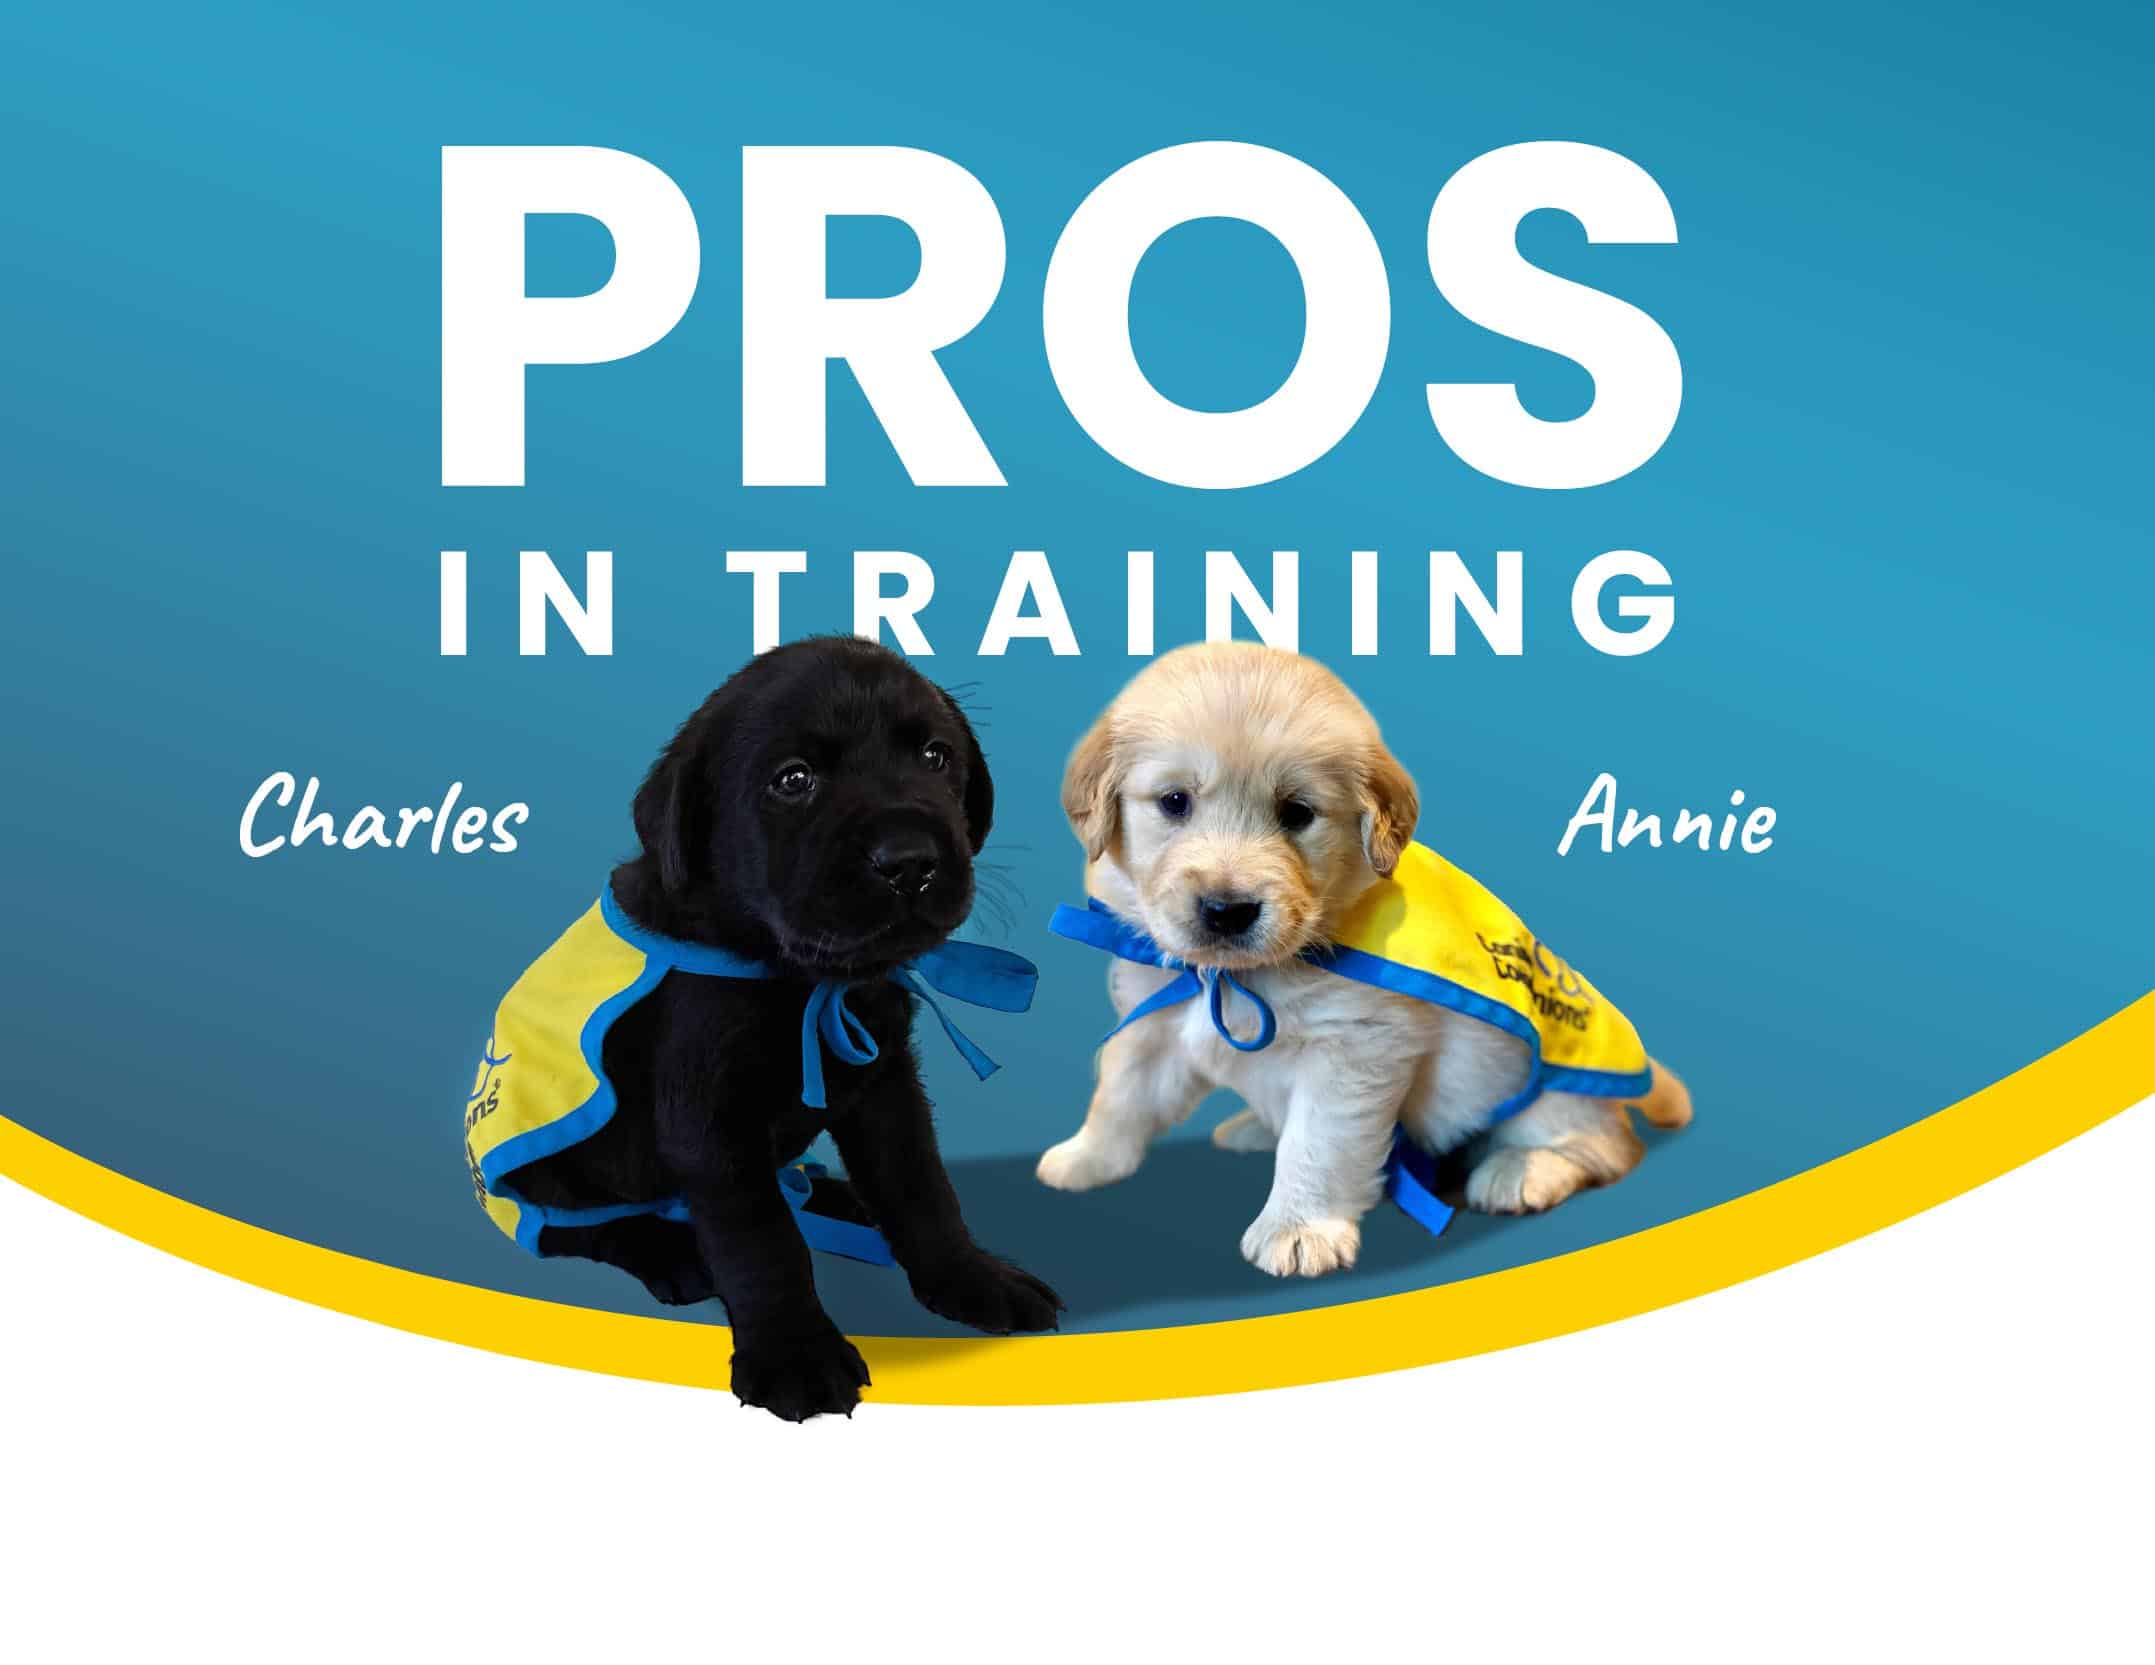 Blue background with the words PROS IN TRAINING with two puppies in yellow puppy capes. The black lab puppy is named Charles and the Golden retriever puppy is named Annie